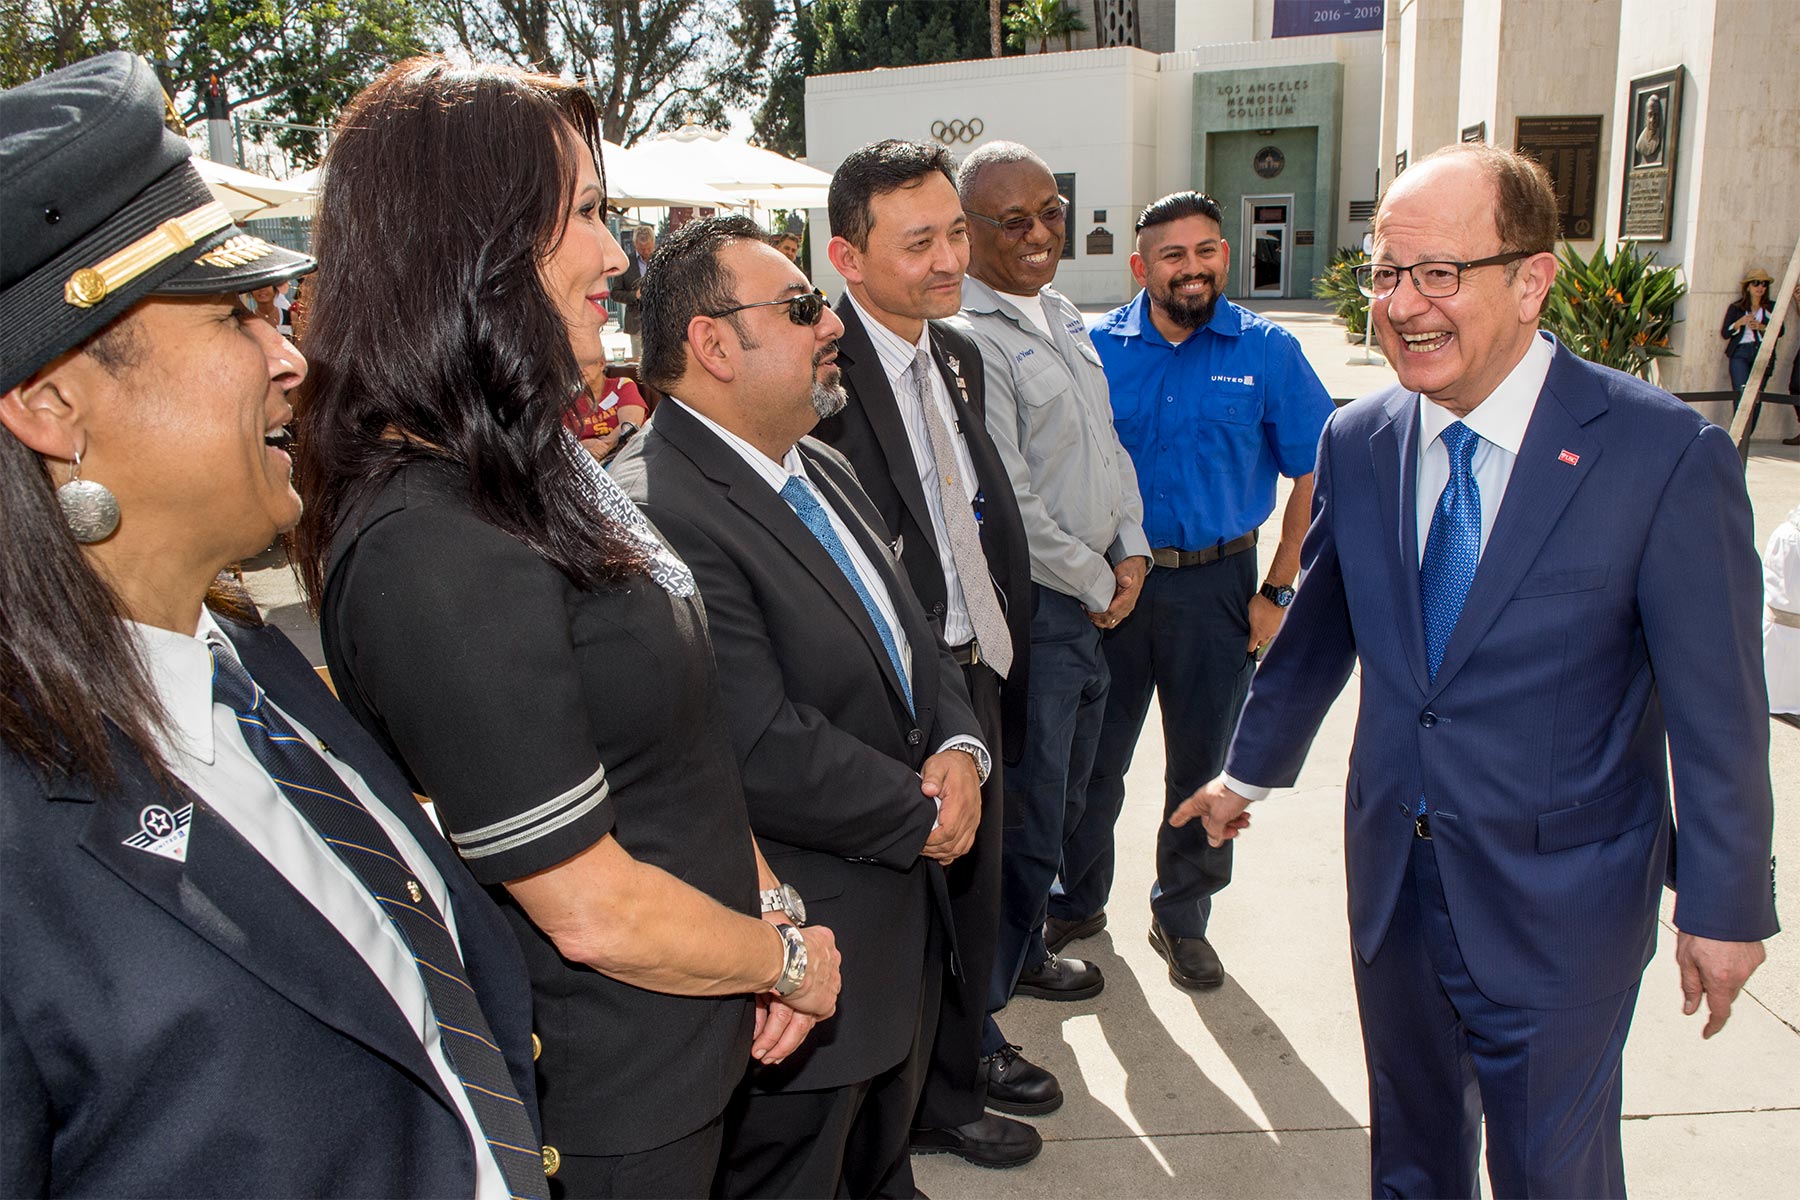 USC President C.L. Max Nikias greets United Airlines employees